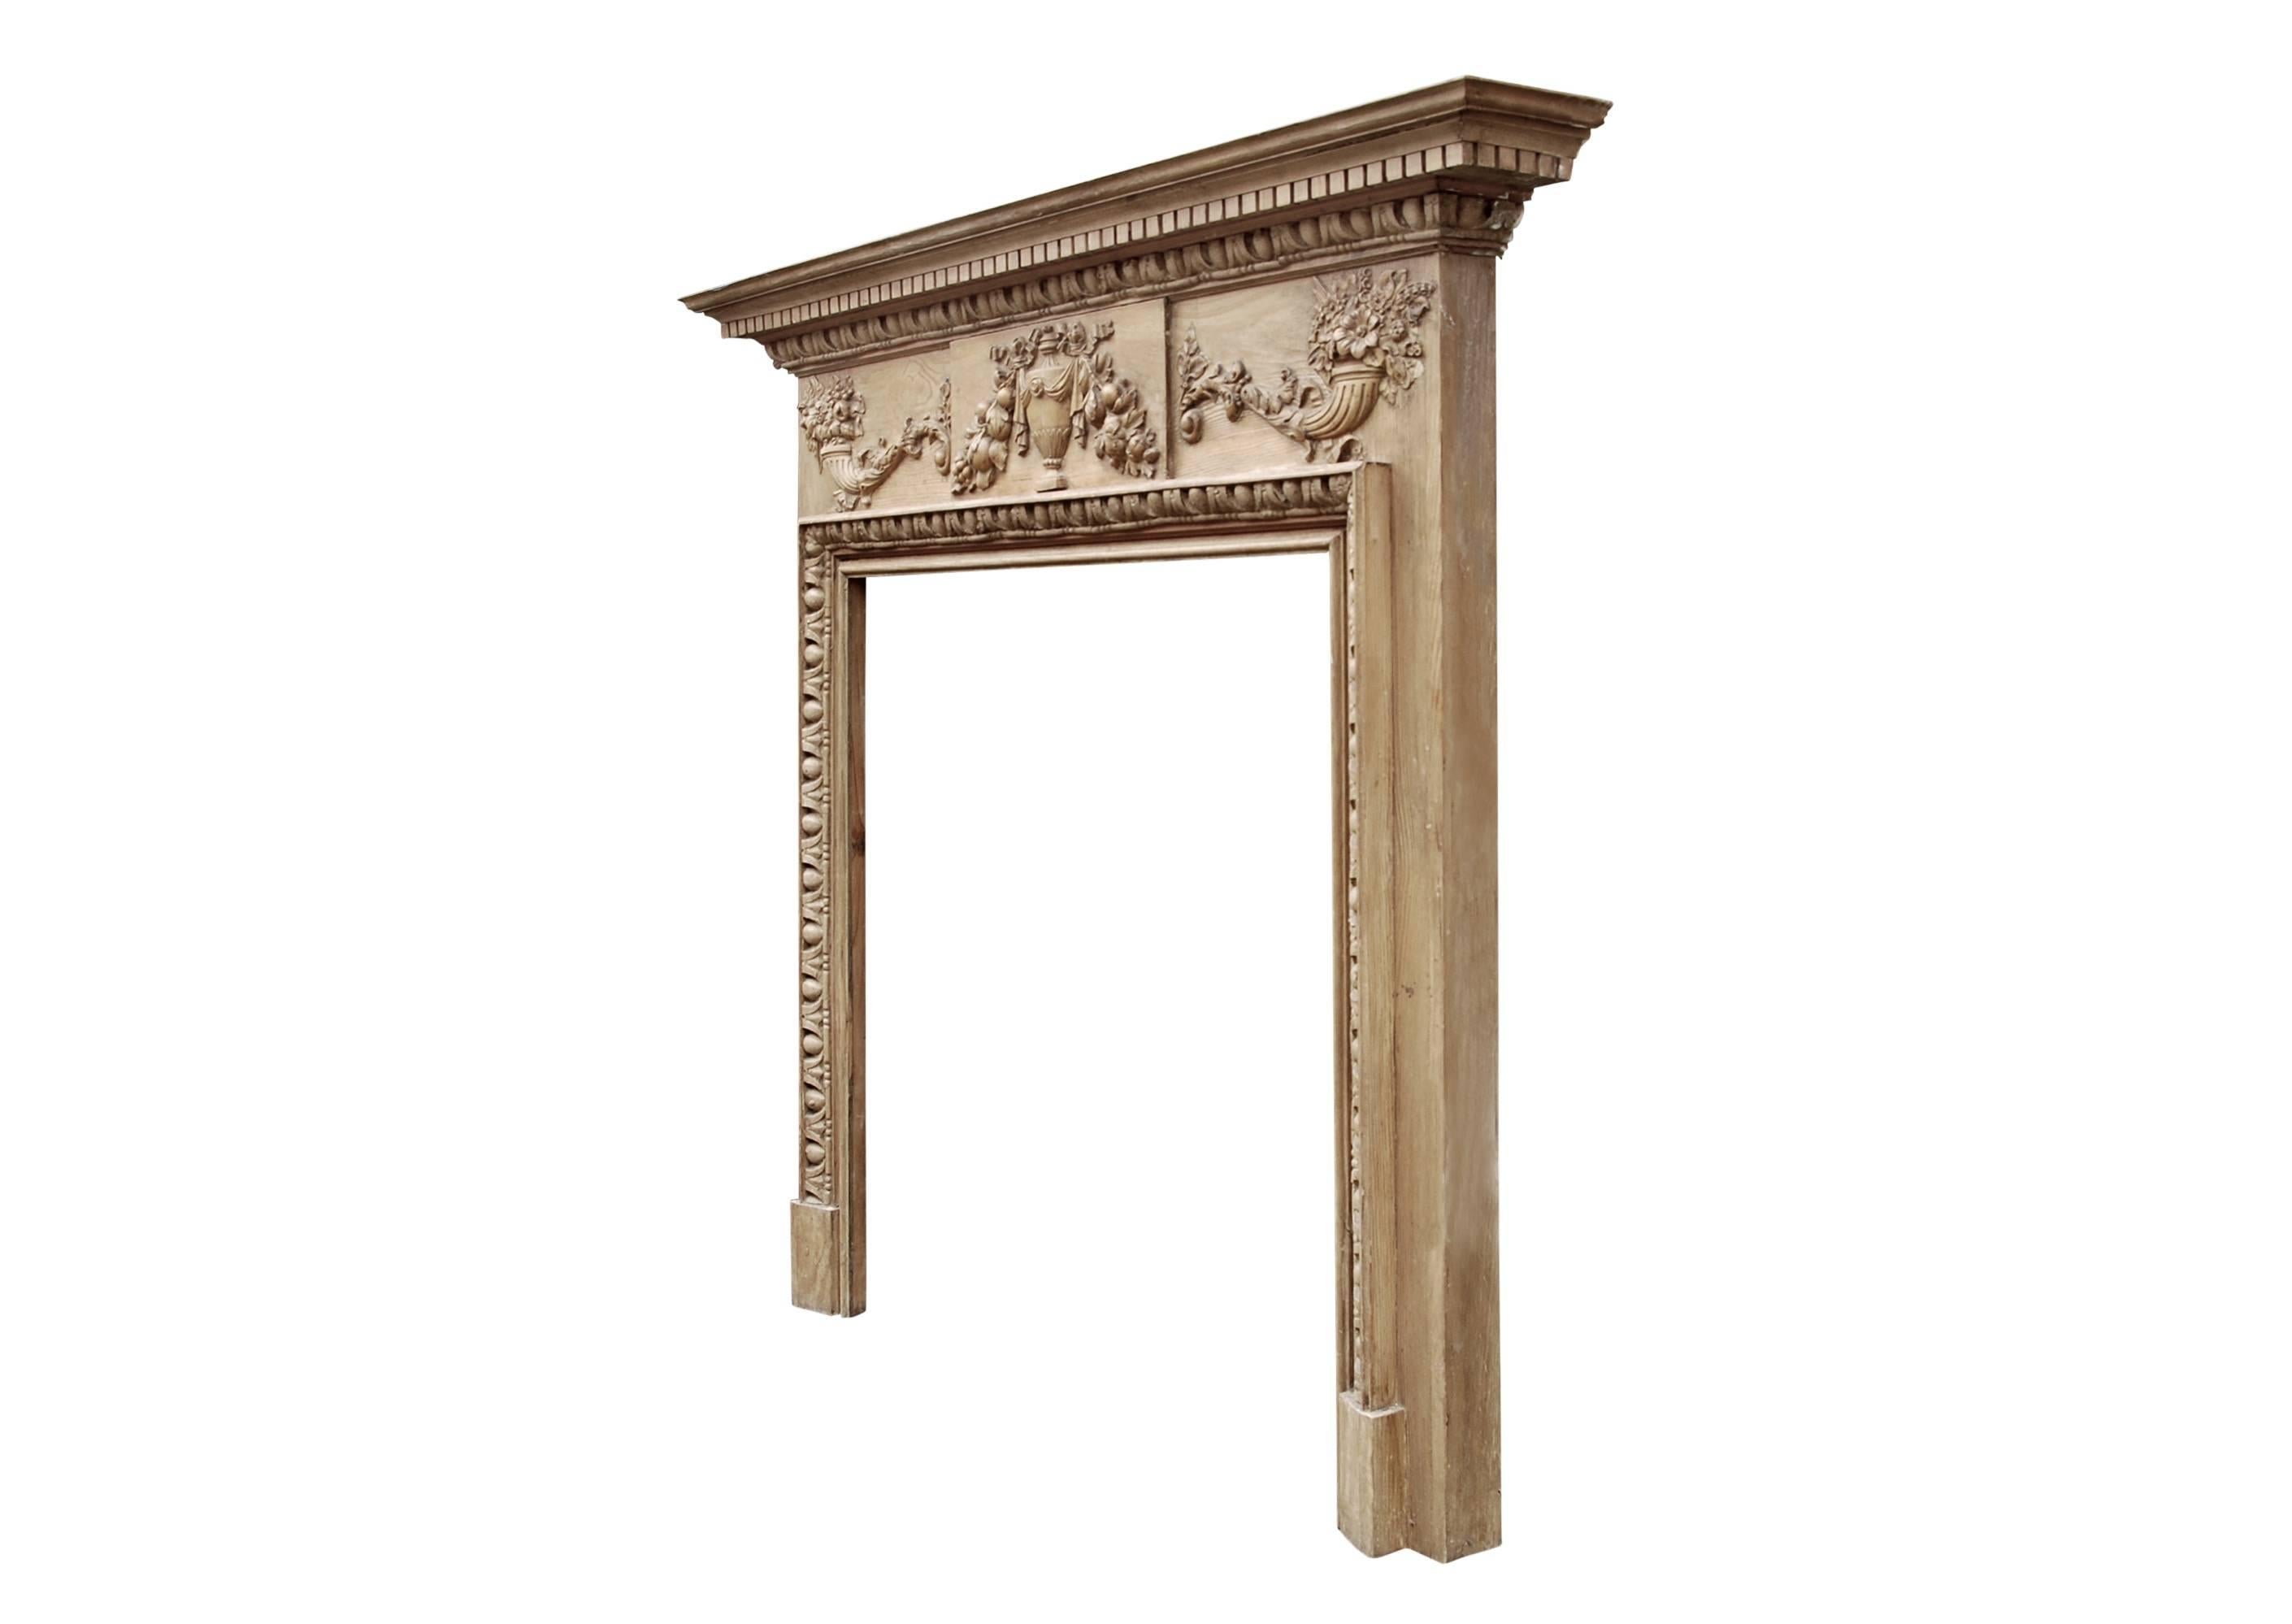 An English Georgian style pine fireplace with gesso enrichments. The frieze with centre blocking of urn tied with ribbon, juxtaposed with Cornucopia holdings leaves and fruit with ornate foliage. Egg-and-tongue carved mouldings to jamb in grounds